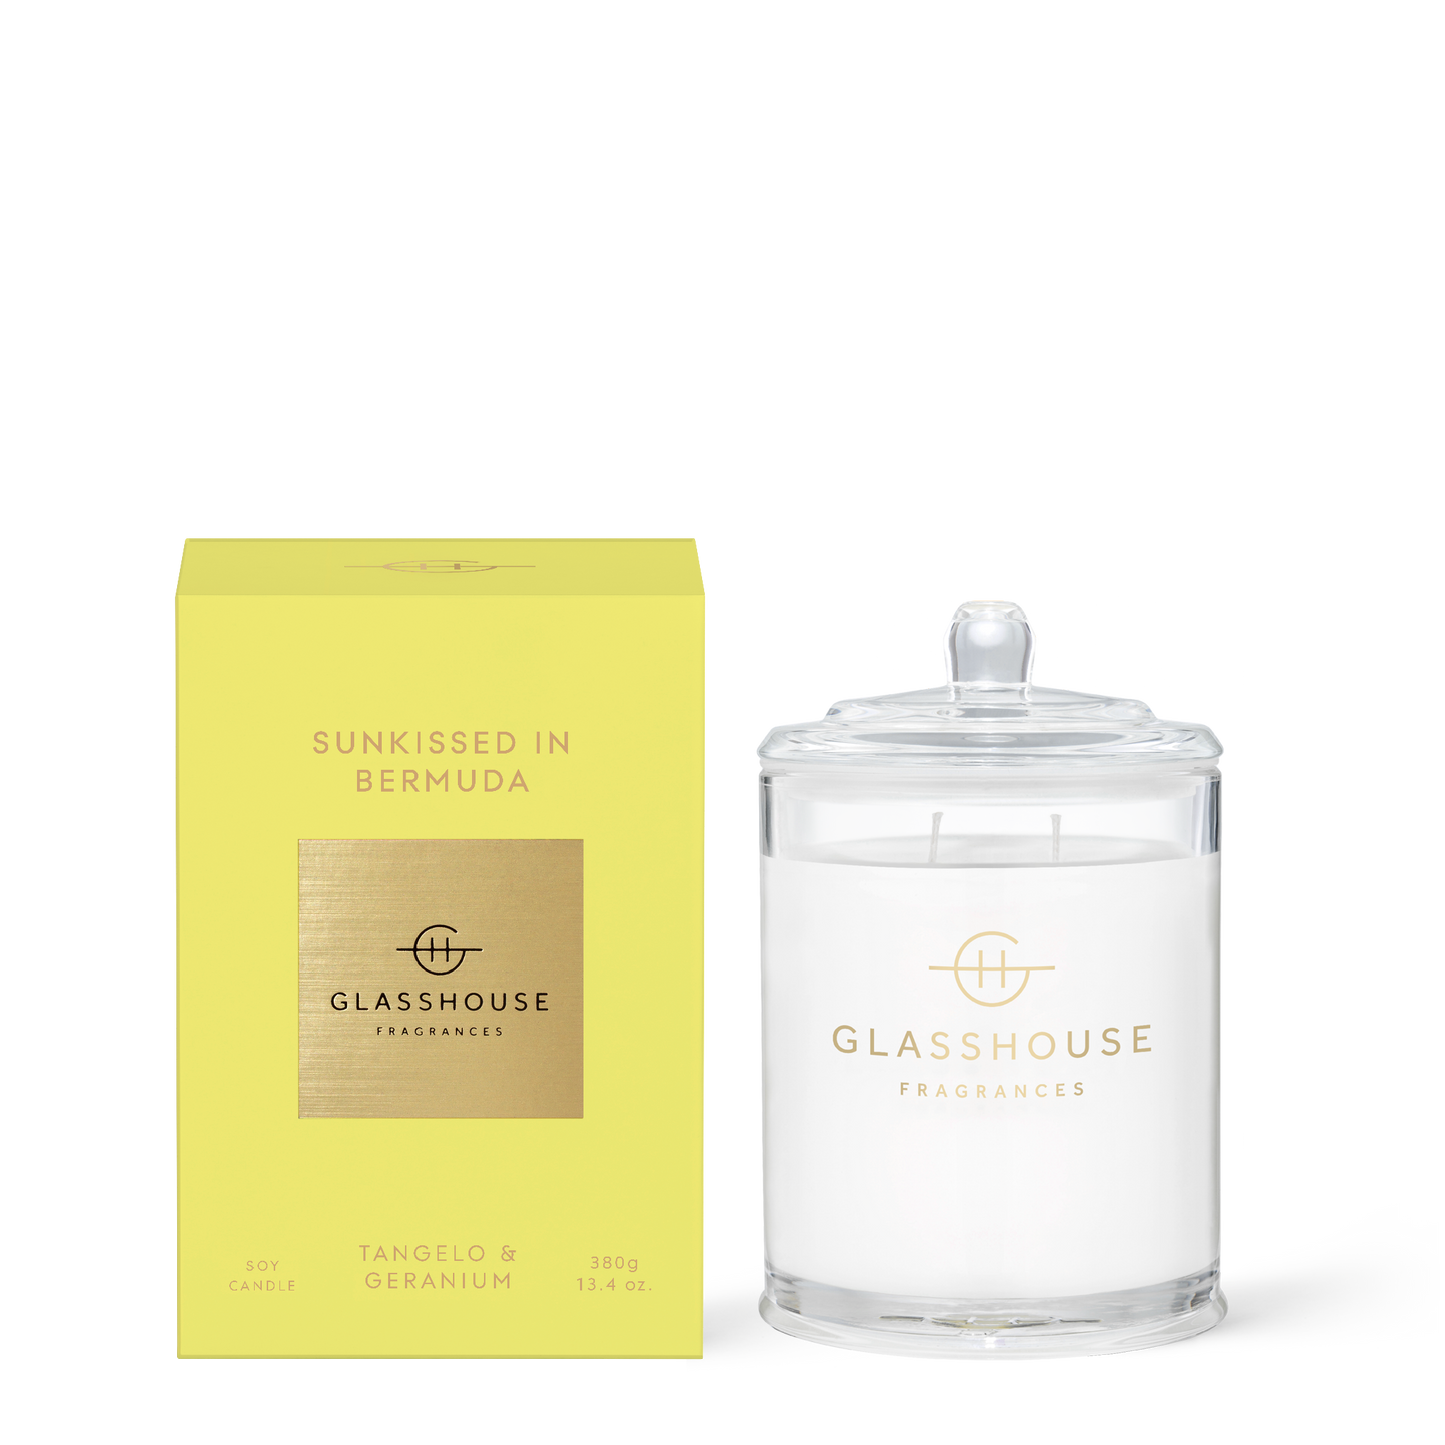 13.4oz Sunkissed in Bermuda - Triple Scented Soy Candle